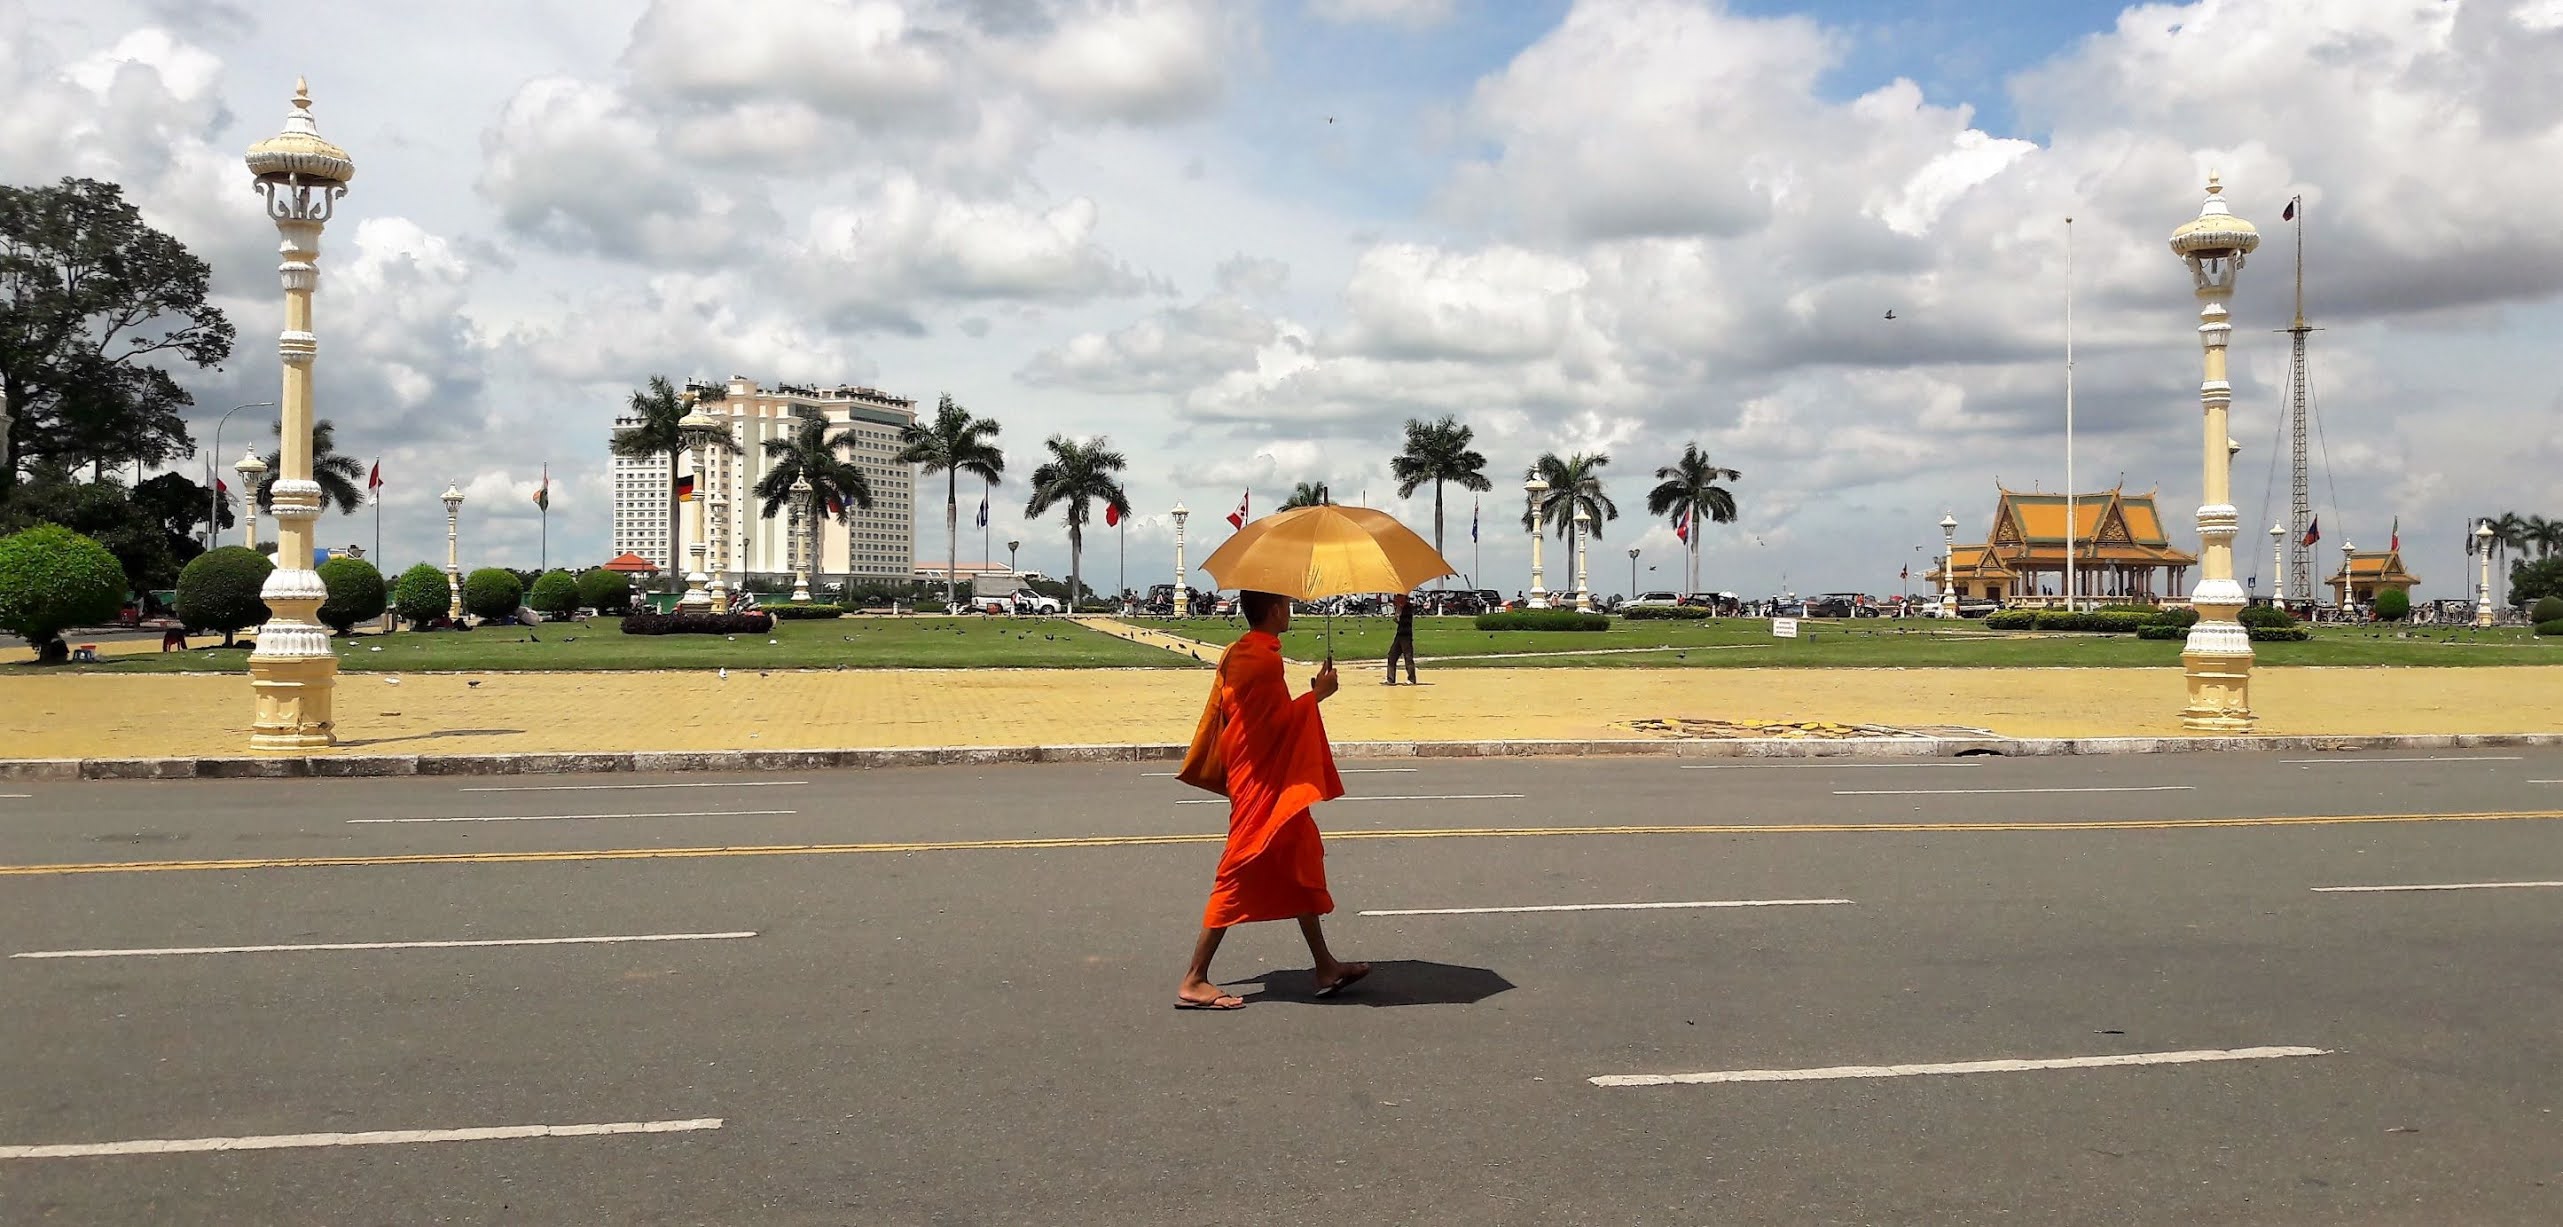 Buddhist monk holding a yellow umbrella walking alone in the street.